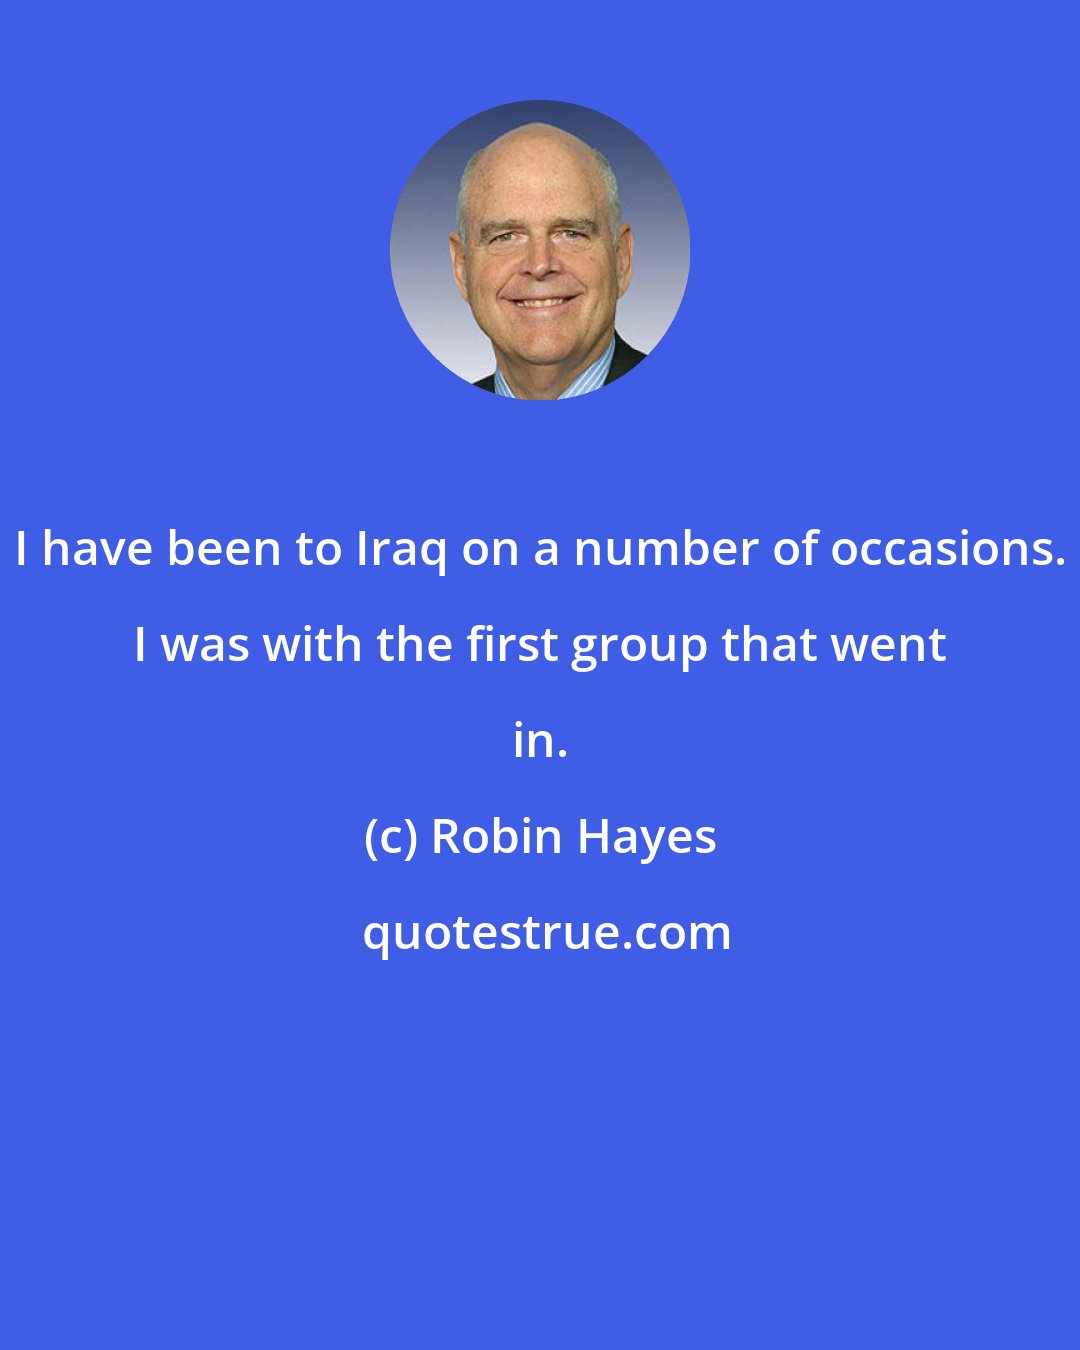 Robin Hayes: I have been to Iraq on a number of occasions. I was with the first group that went in.